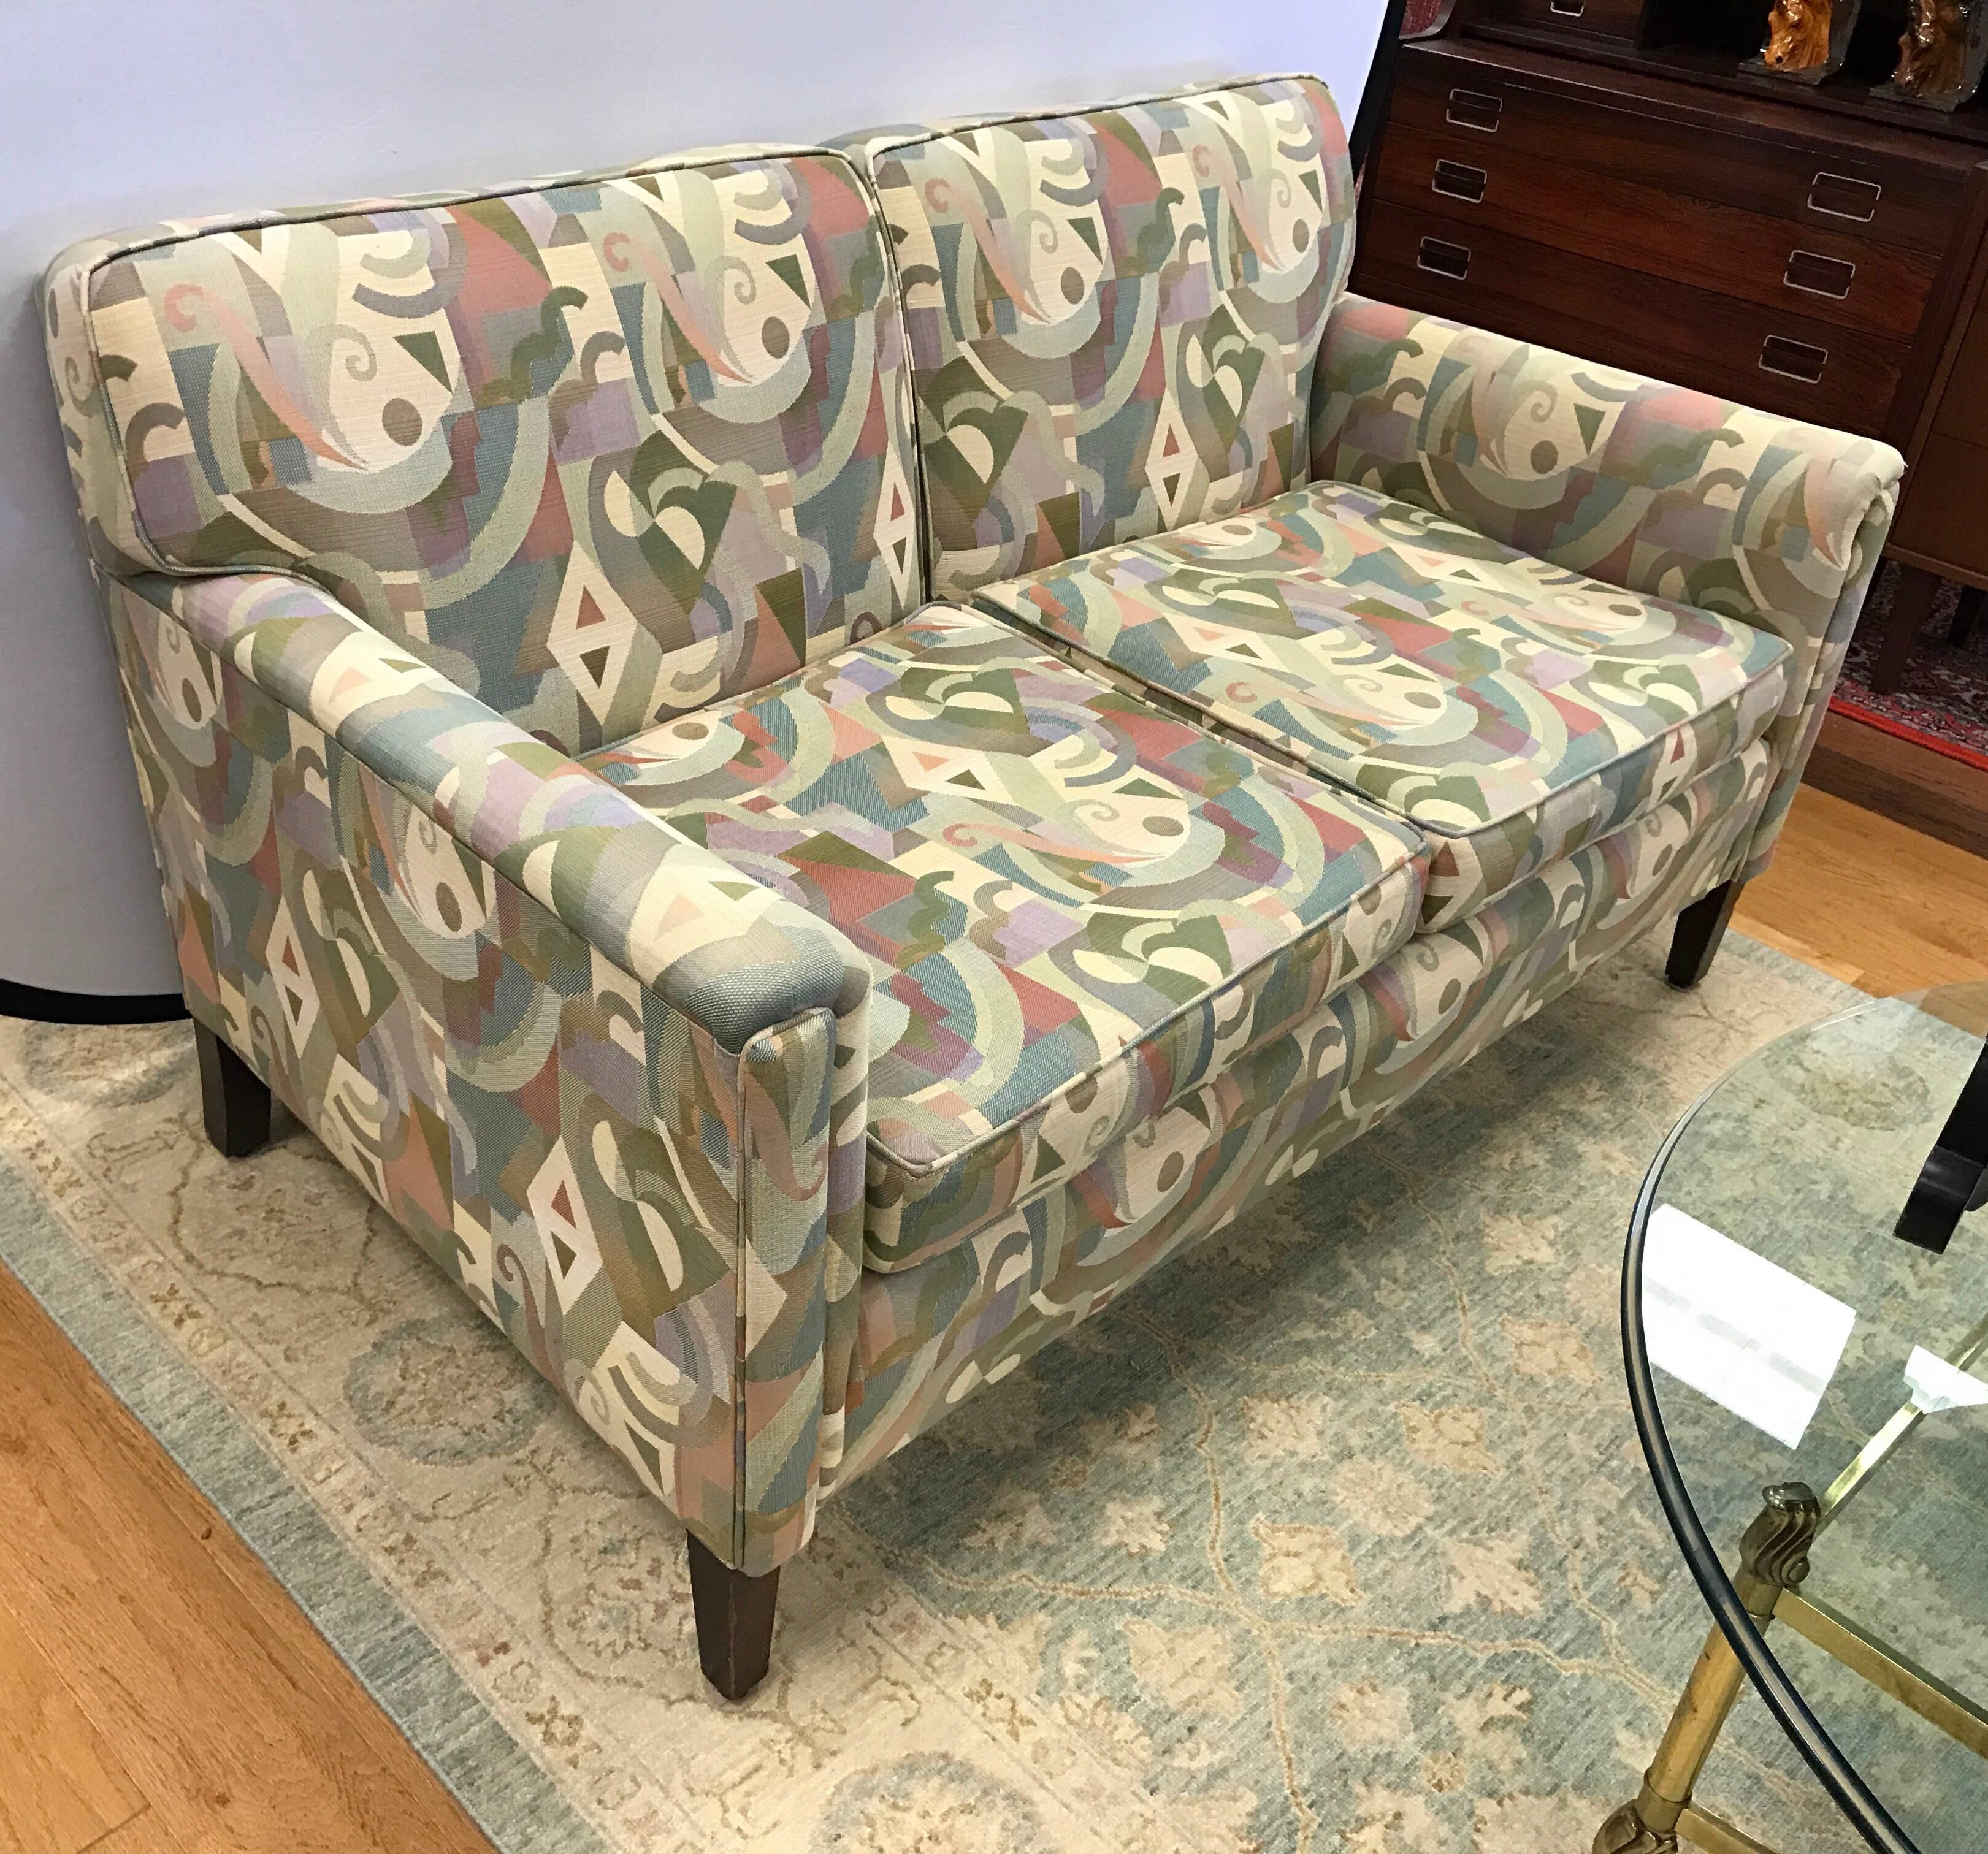 Mod mid-century modern settee or loveseat newly upholstered in a Knoll fabric.